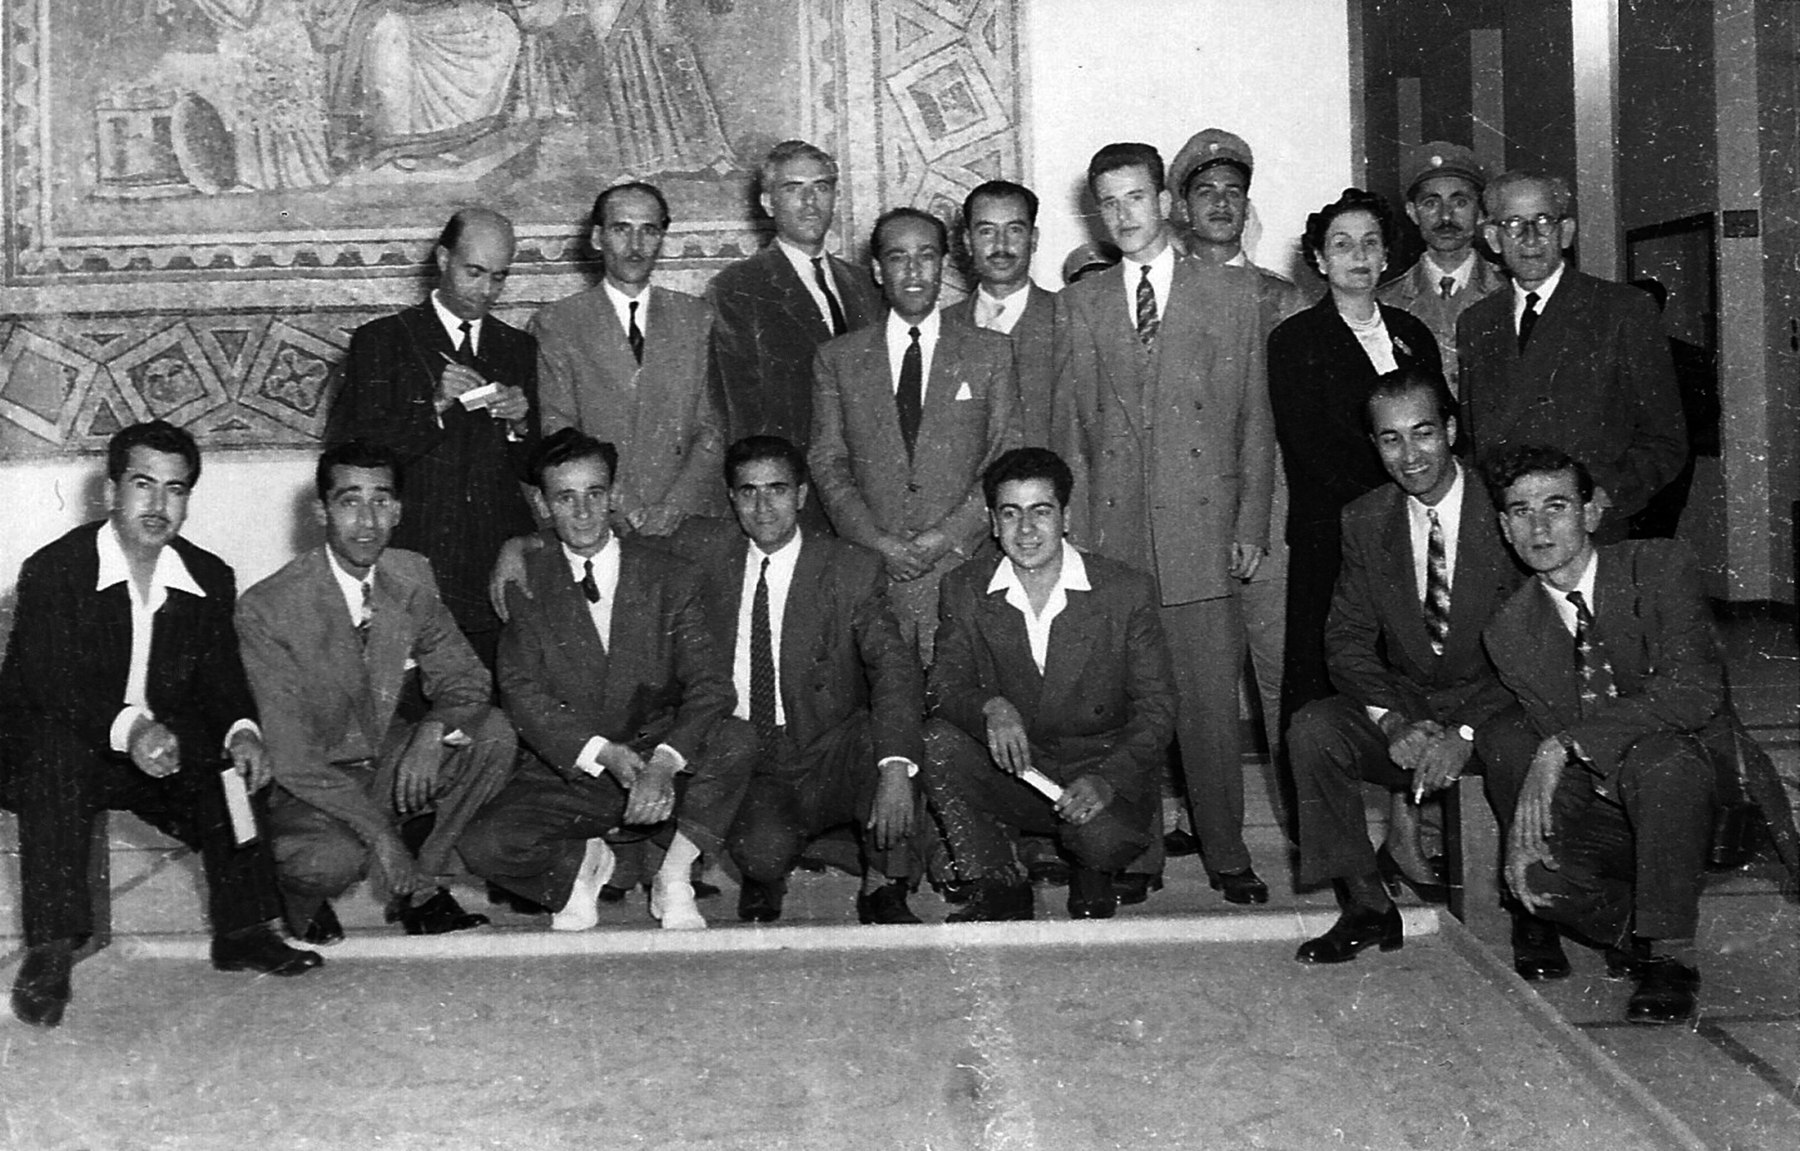 A History of Art Associations in Damascus During the 20th Century: From Emergence Until the First Arab Conference of Fine Arts in Damascus in 1971 - Features - Atassi Foundation